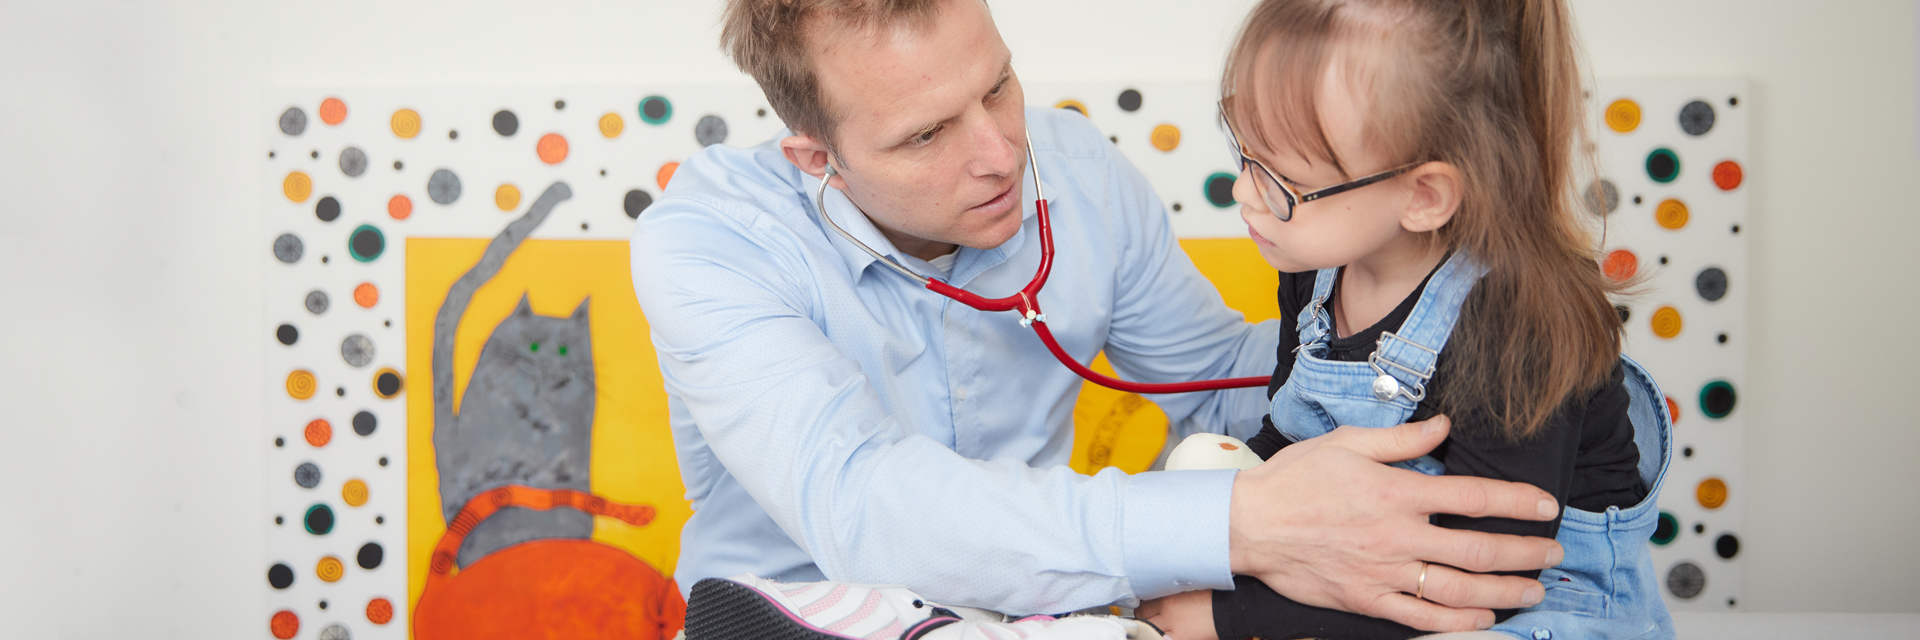 Picture: A doctor at the paediatric clinic examines the breathing of a small patient with a stethoscope.